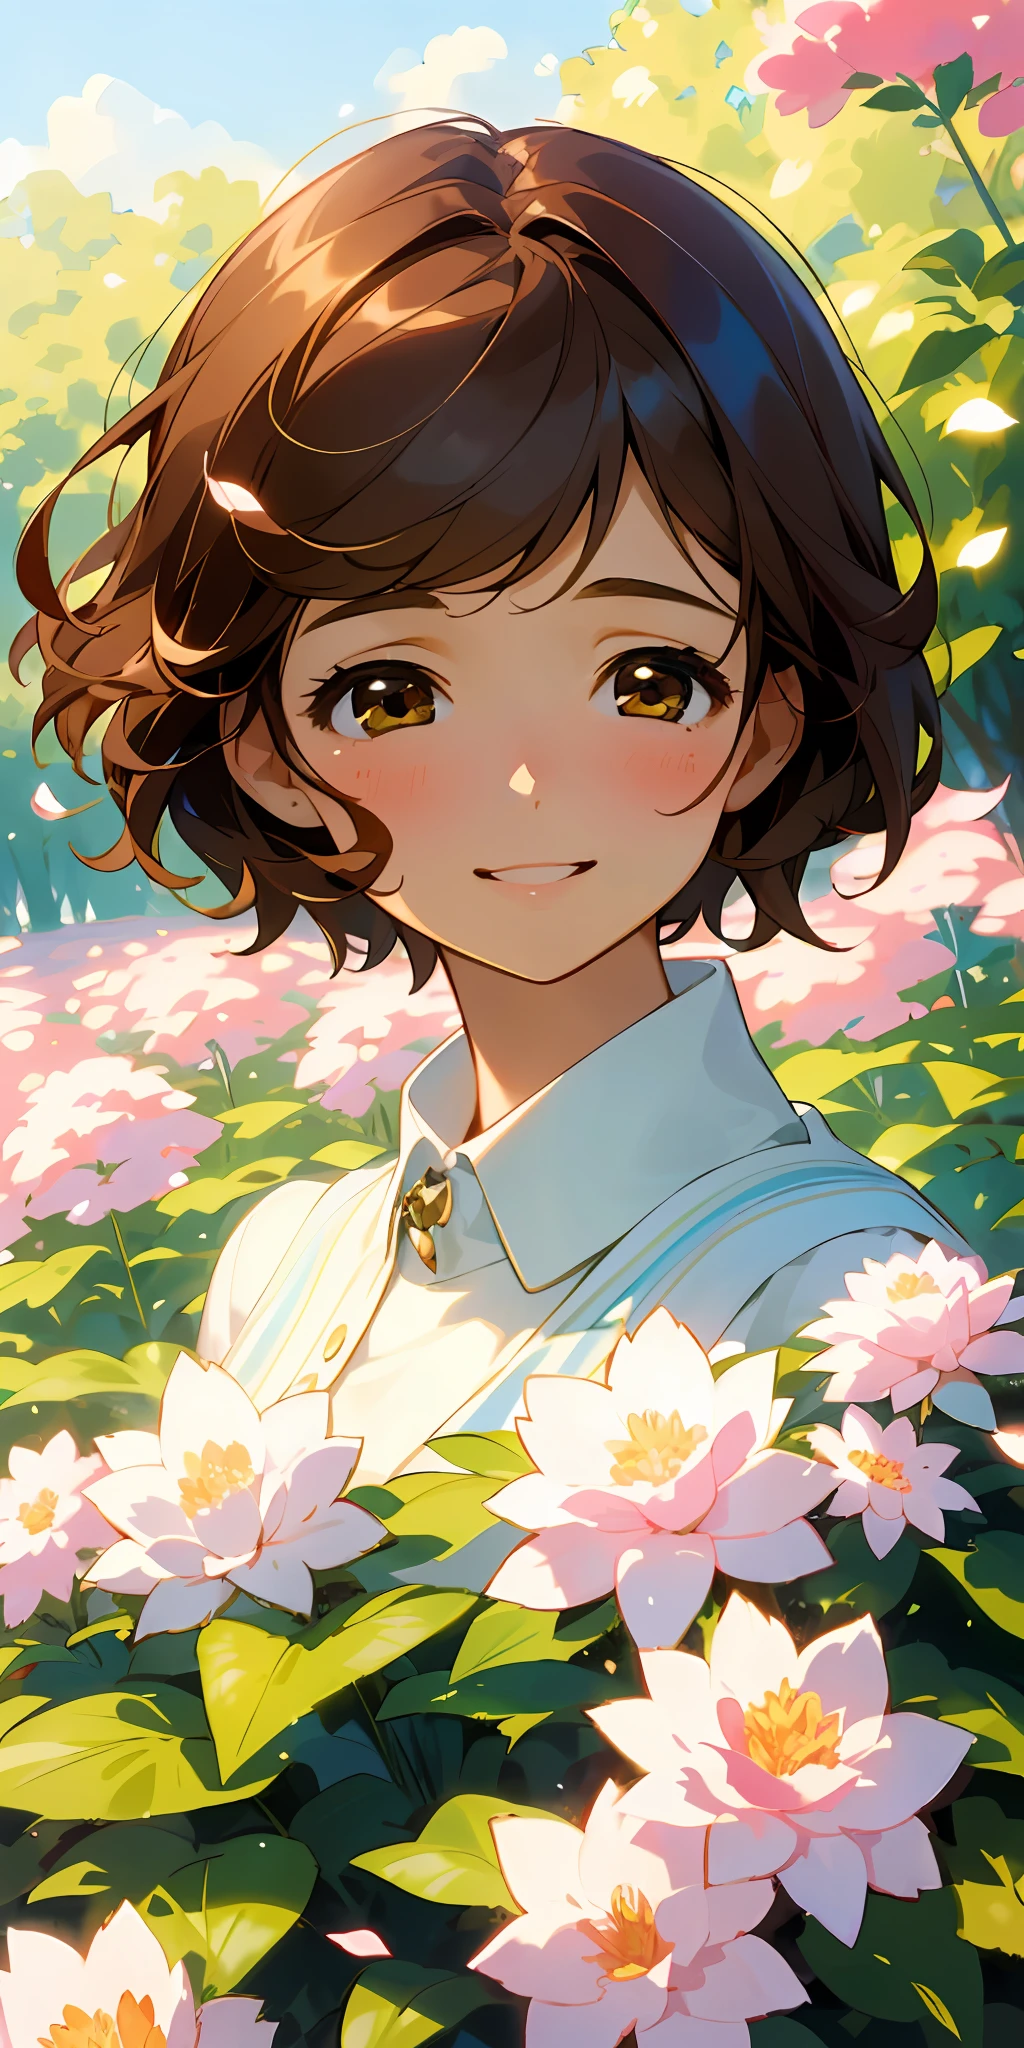 (top quality, masterpiece, ultra-realistic), one beautiful delicate portrait of a girl with short hair, brown hair, smiling, soft and peaceful expression, squinting eyes full of joy, the background landscape is a garden with petals and puffs flying around. --v6